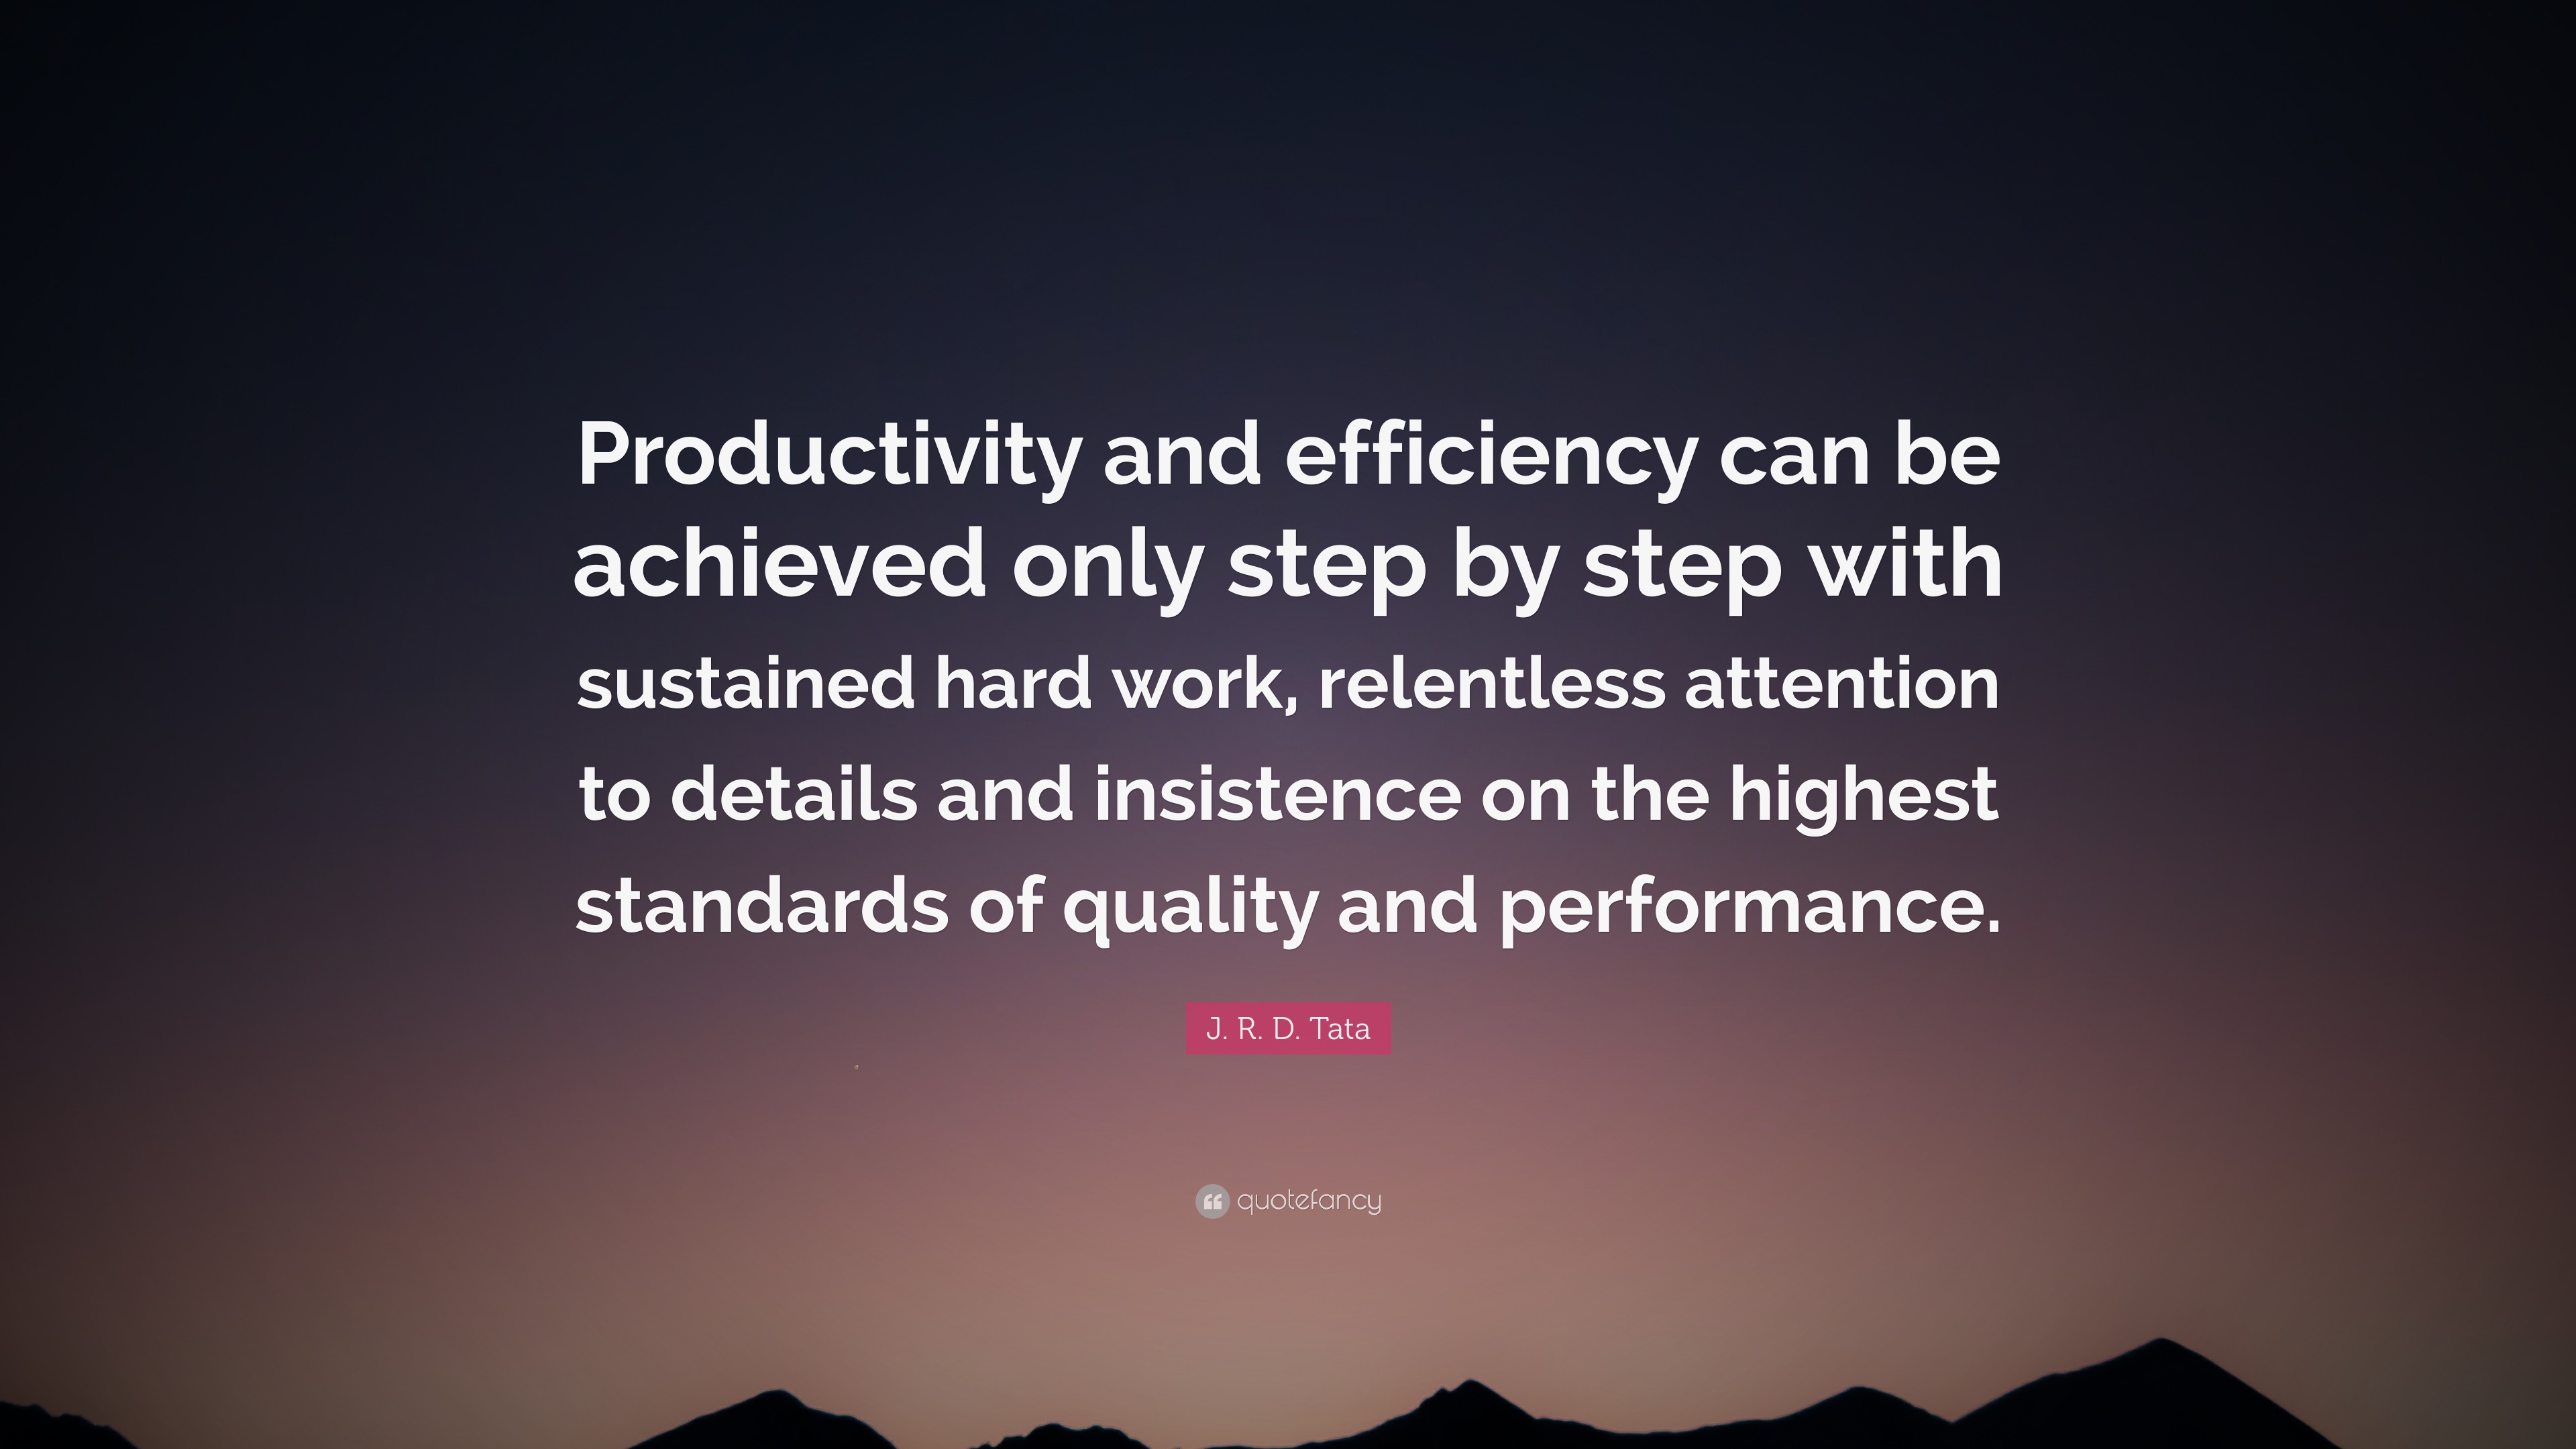 J. R. D. Tata Quote: “Productivity and efficiency can be achieved only